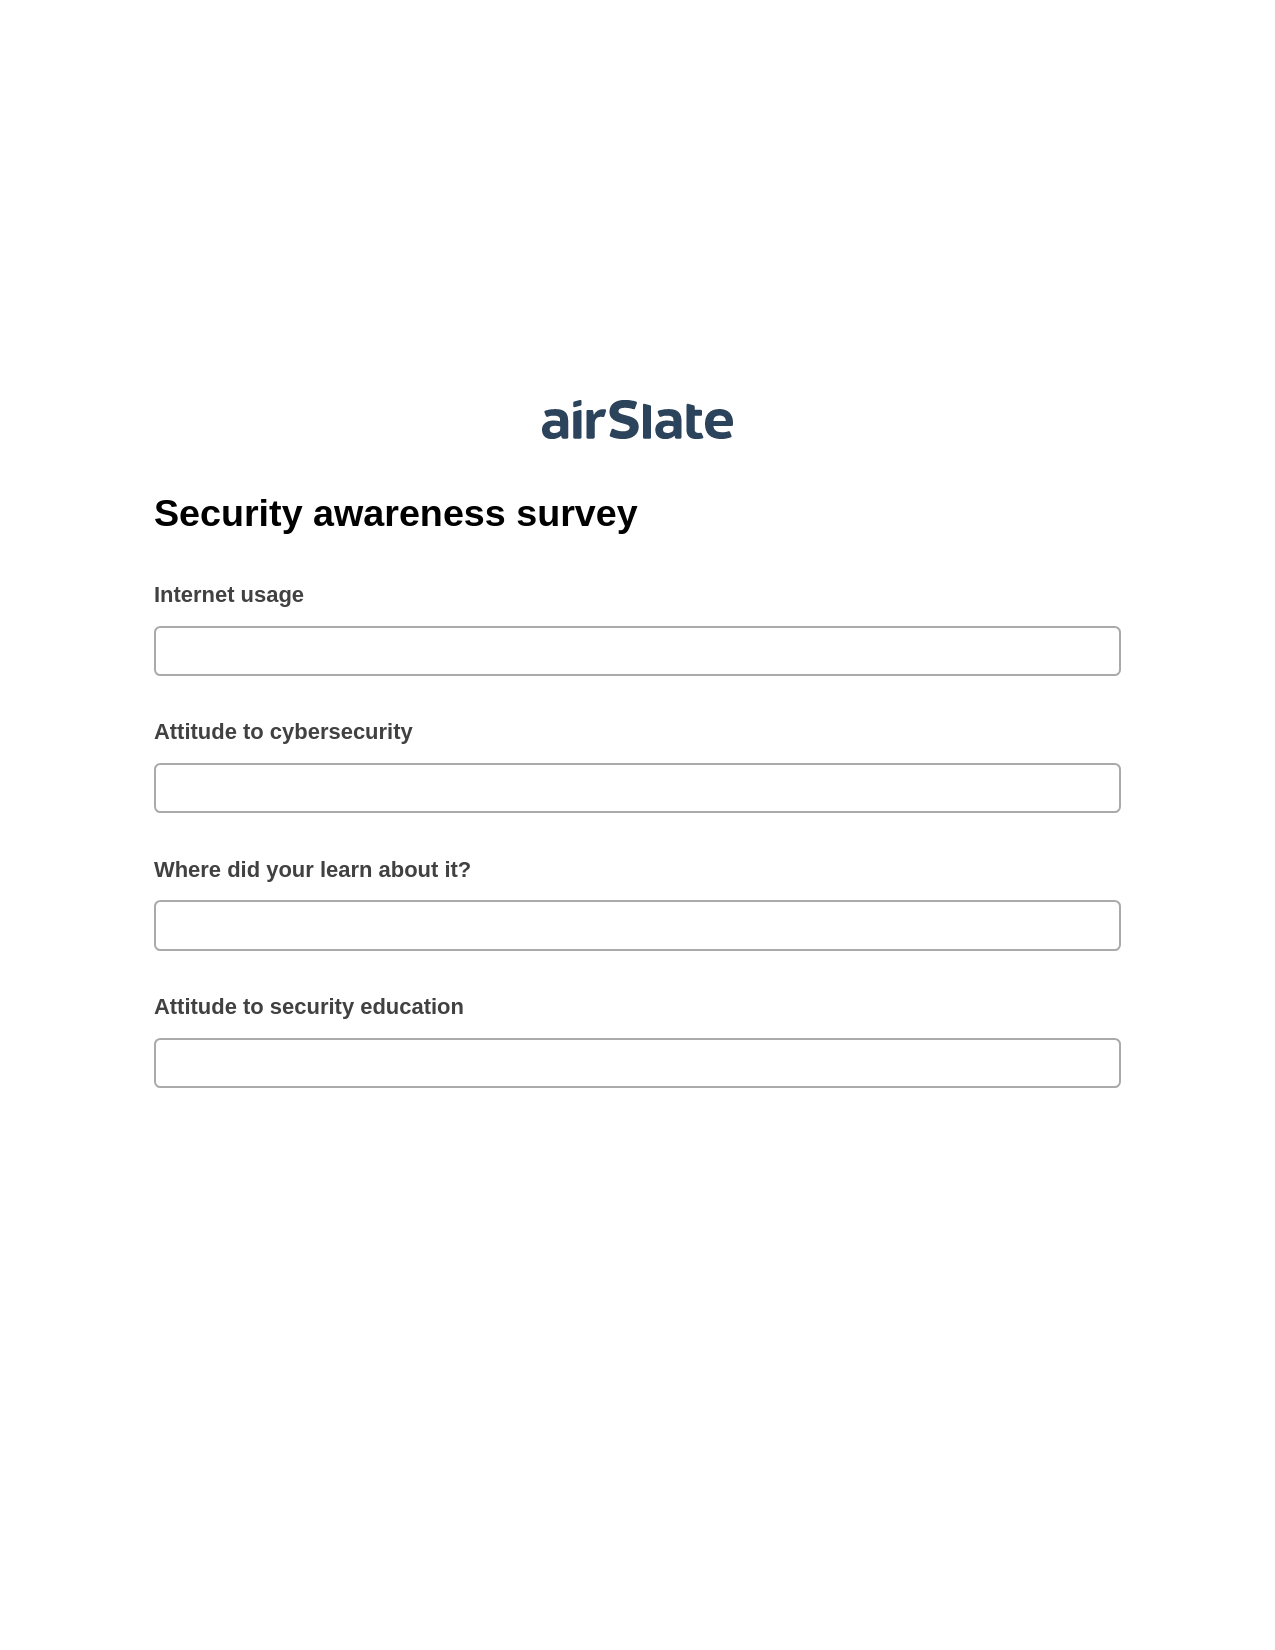 Security awareness survey Pre-fill from Google Sheet Dropdown Options Bot, Lock the slate bot, Archive to SharePoint Folder Bot